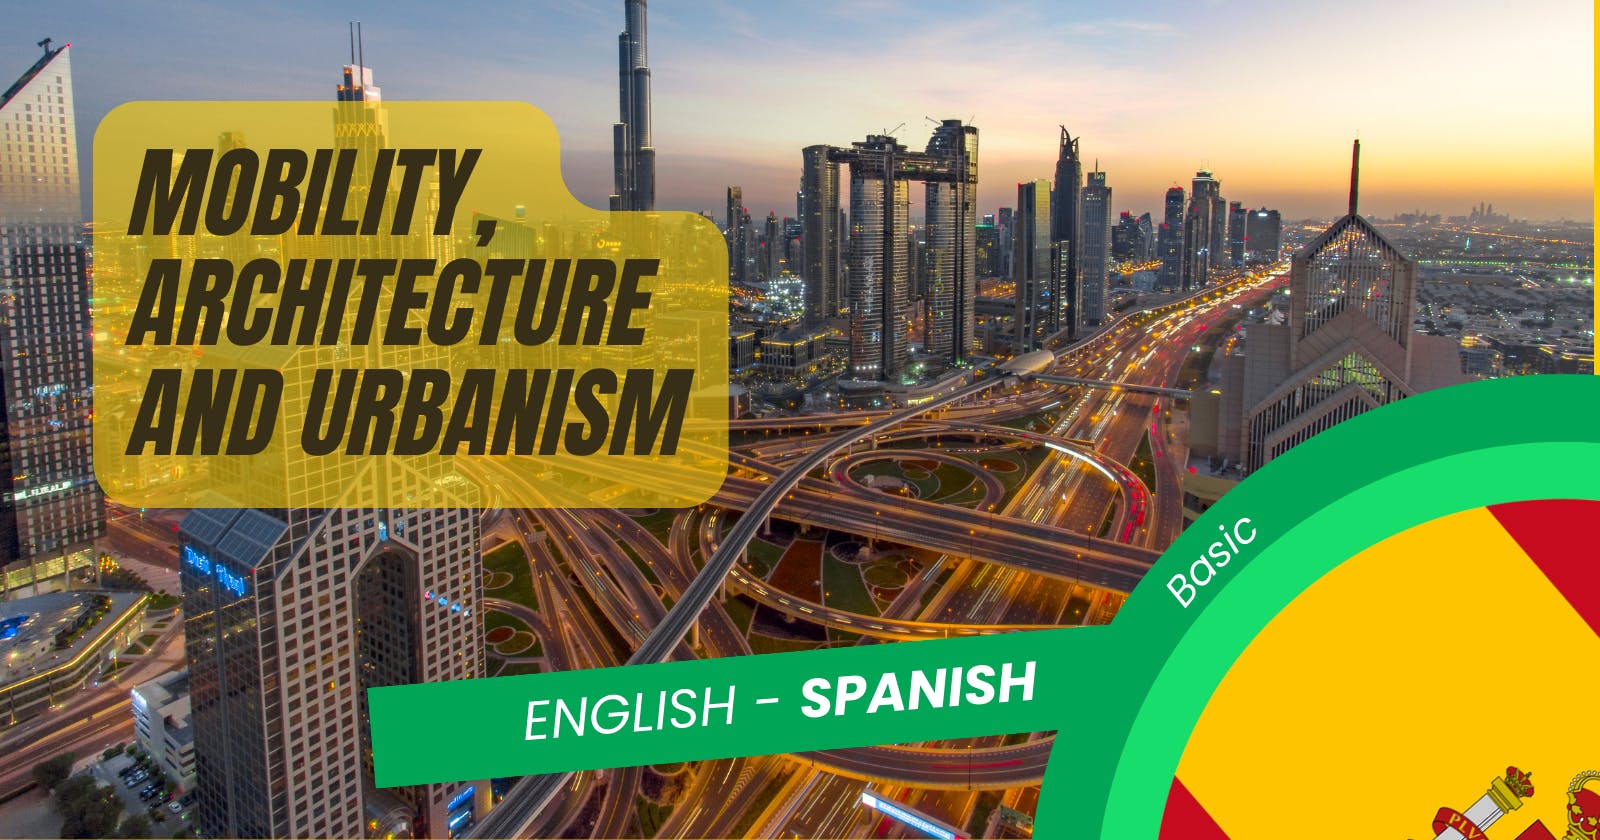 🇪🇸 Mastering Basic Spanish Vocabulary: 
Mobility and Architecture Terms